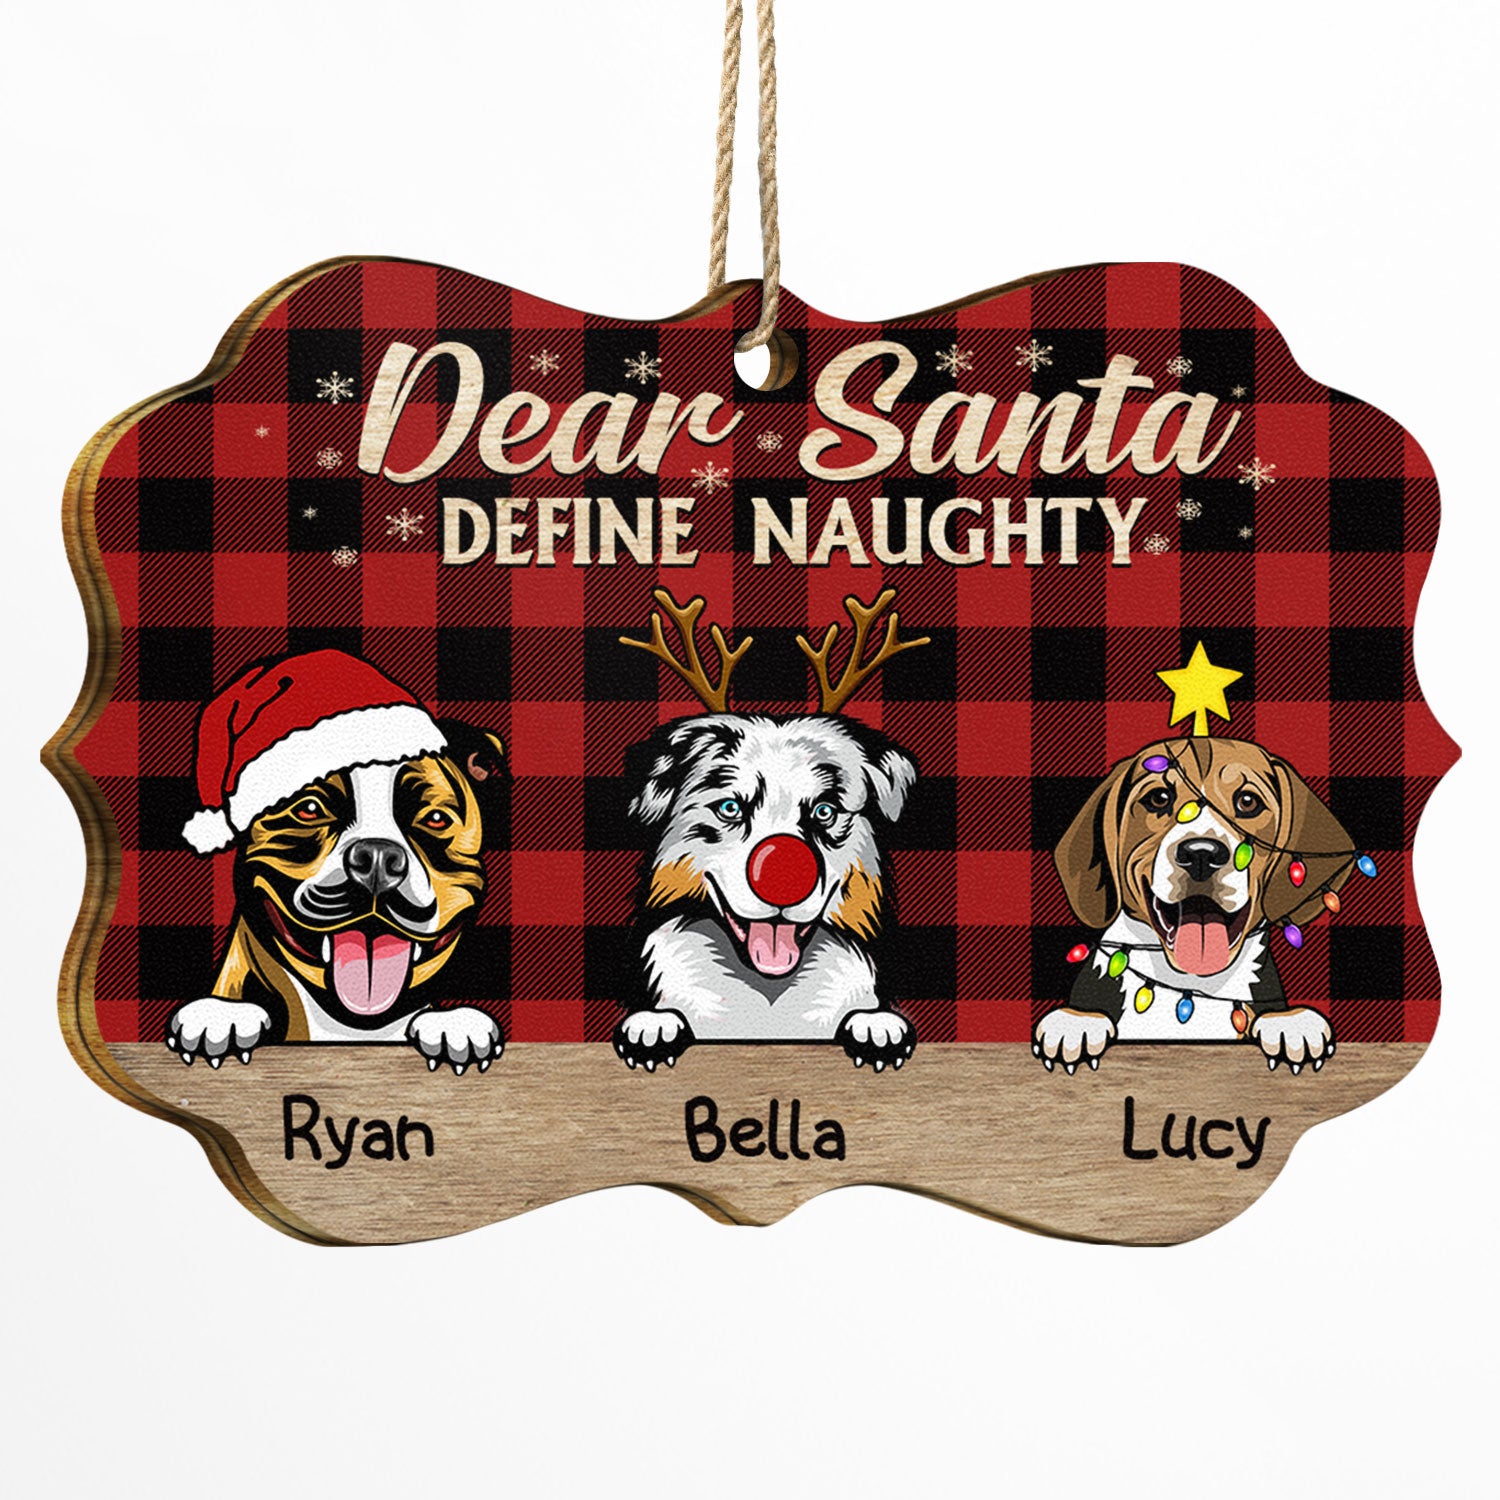 Dear Santa Define Naughty Christmas Dog - Christmas Gift For Dog Lovers - Personalized Wooden Ornament